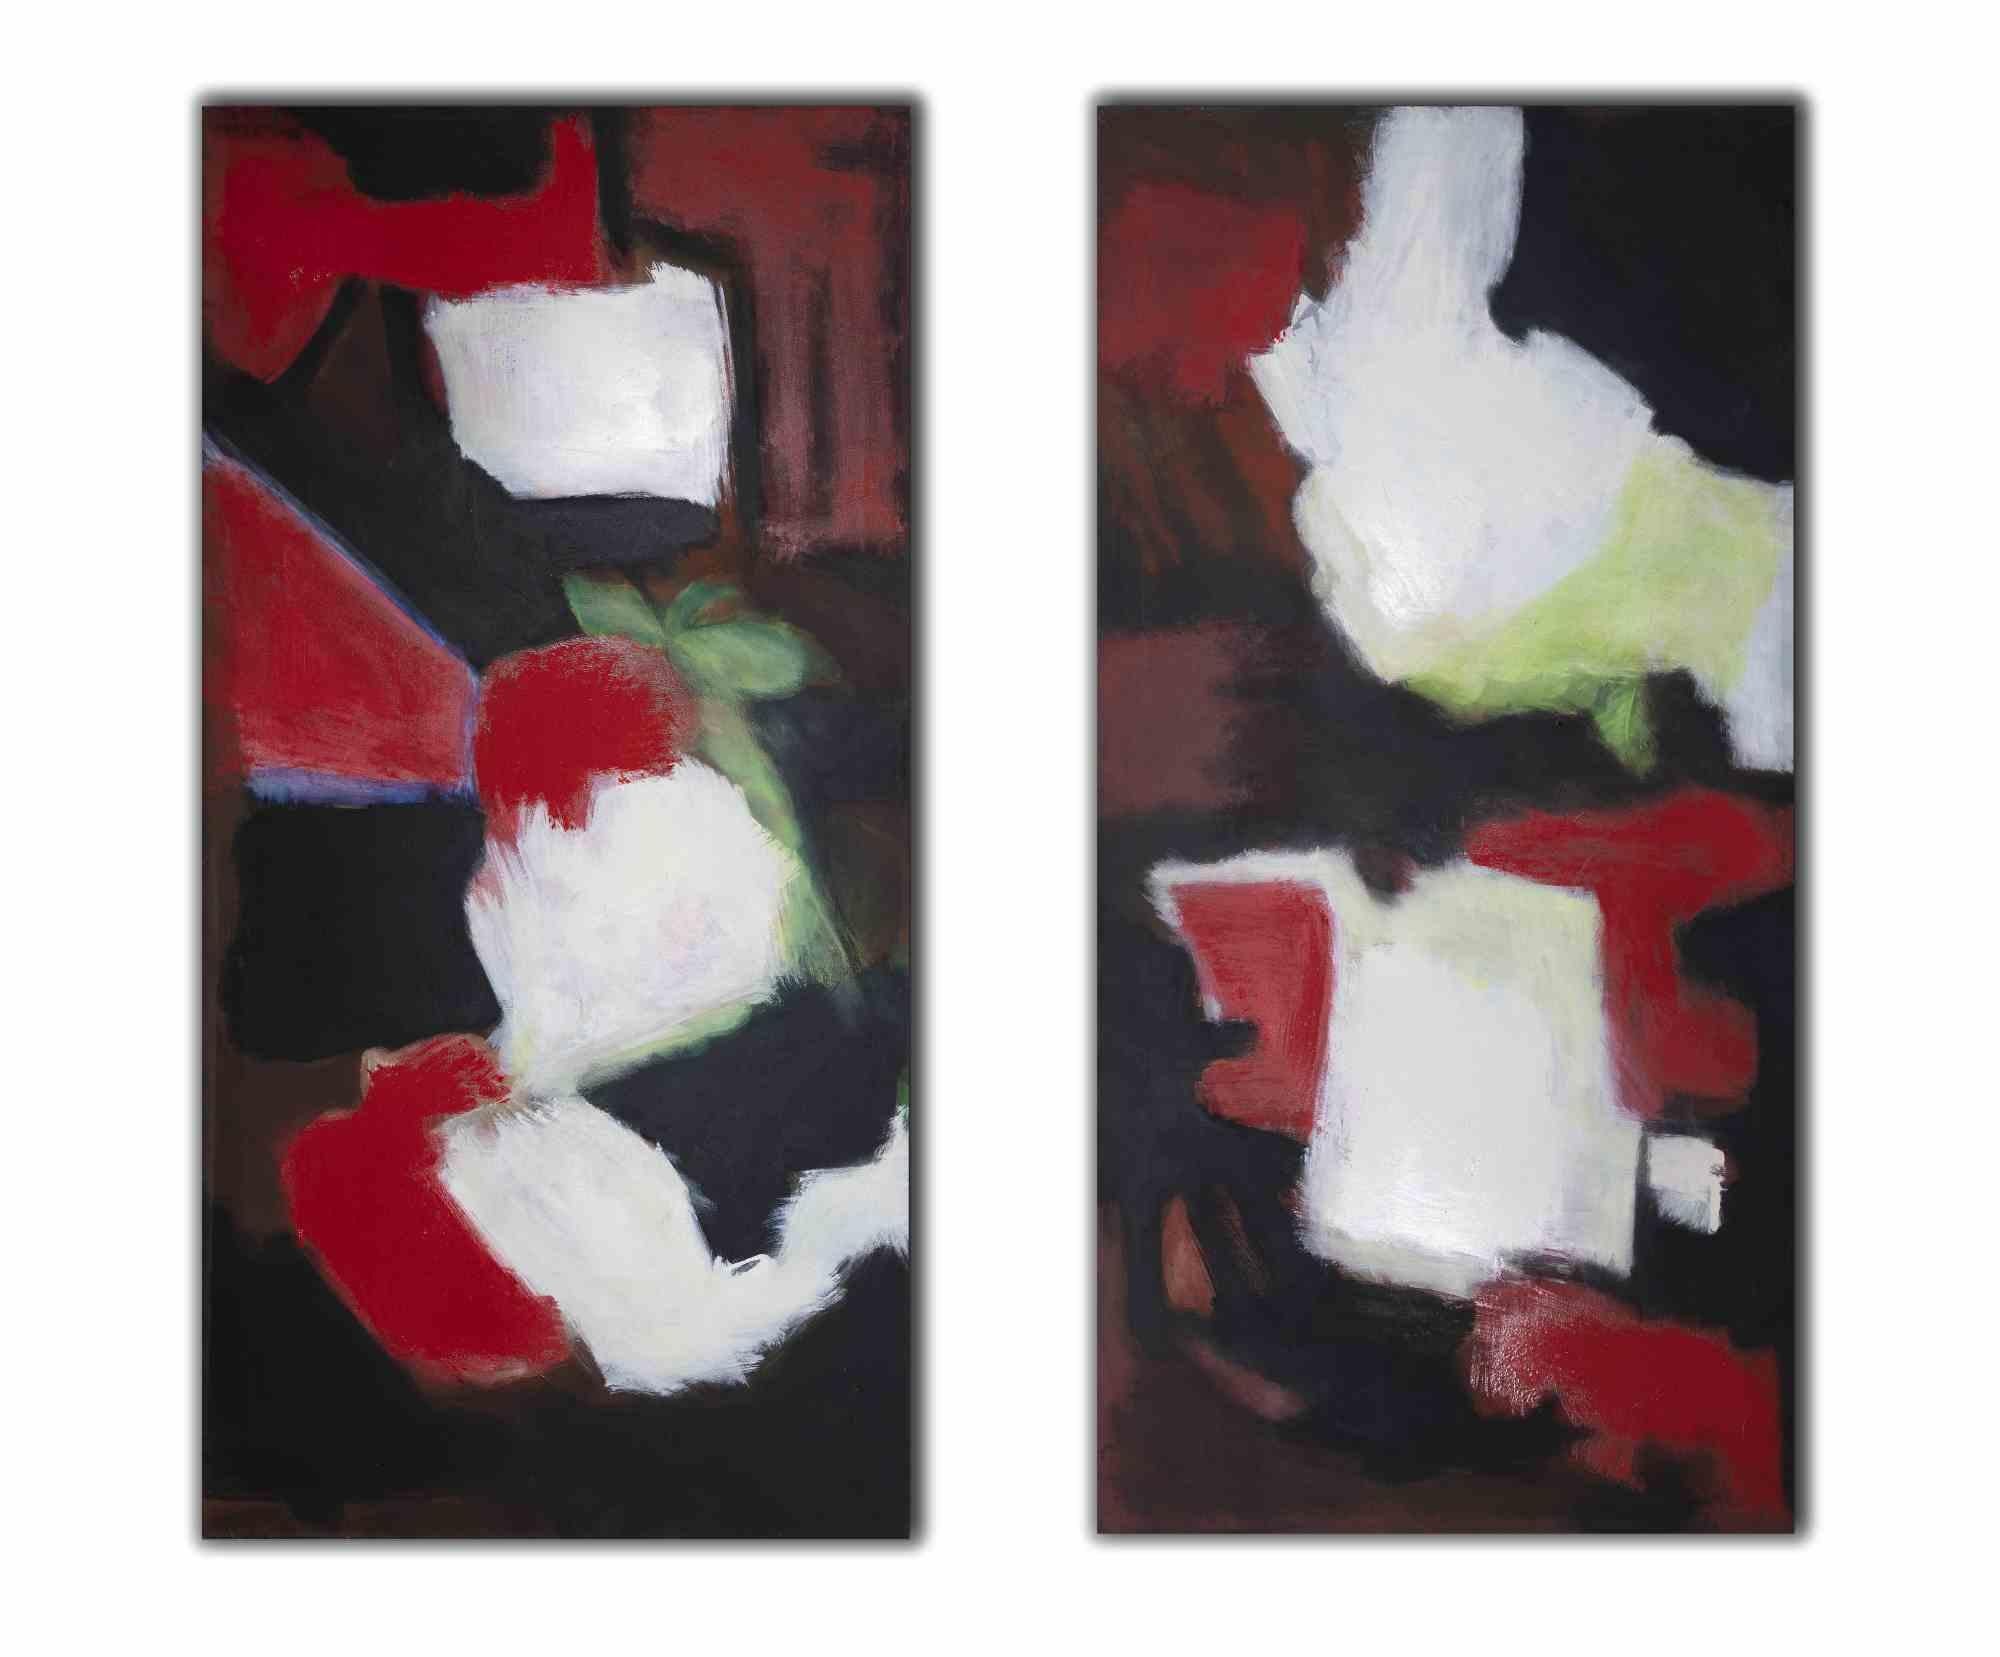 Giorgio Lo Fermo Abstract Painting - Pair of Abstract Compositions -  Oil On Canvas by G. Lo Fermo - 2010